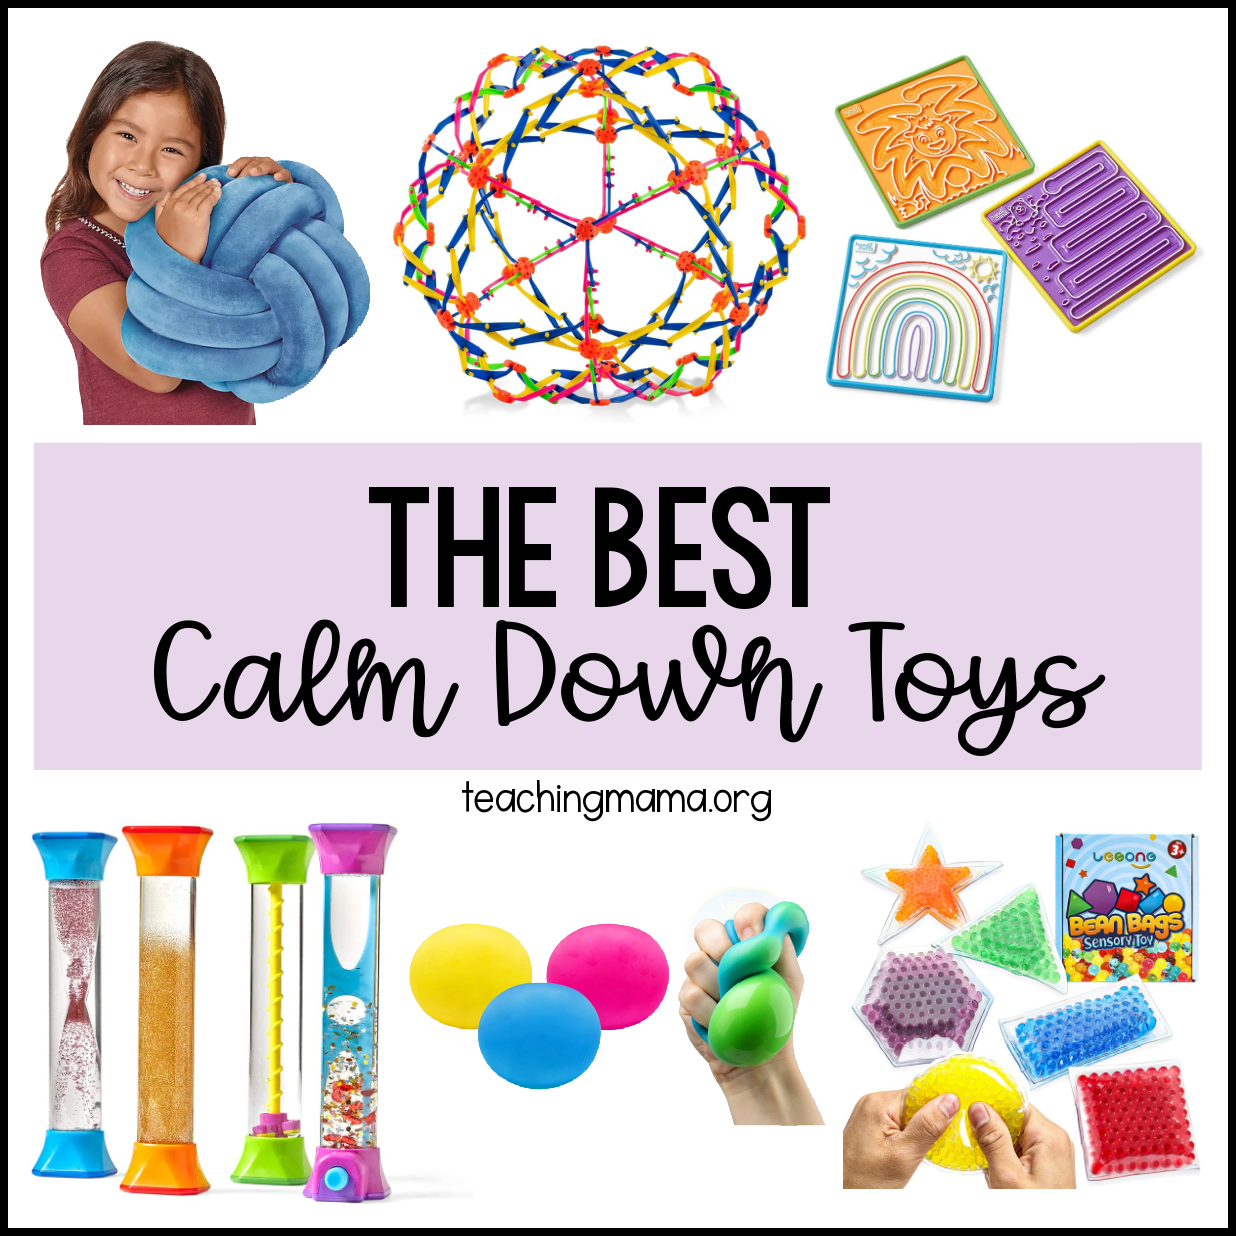 How To Teach Your Students To Use A Calm Down Corner - Teaching Firsties